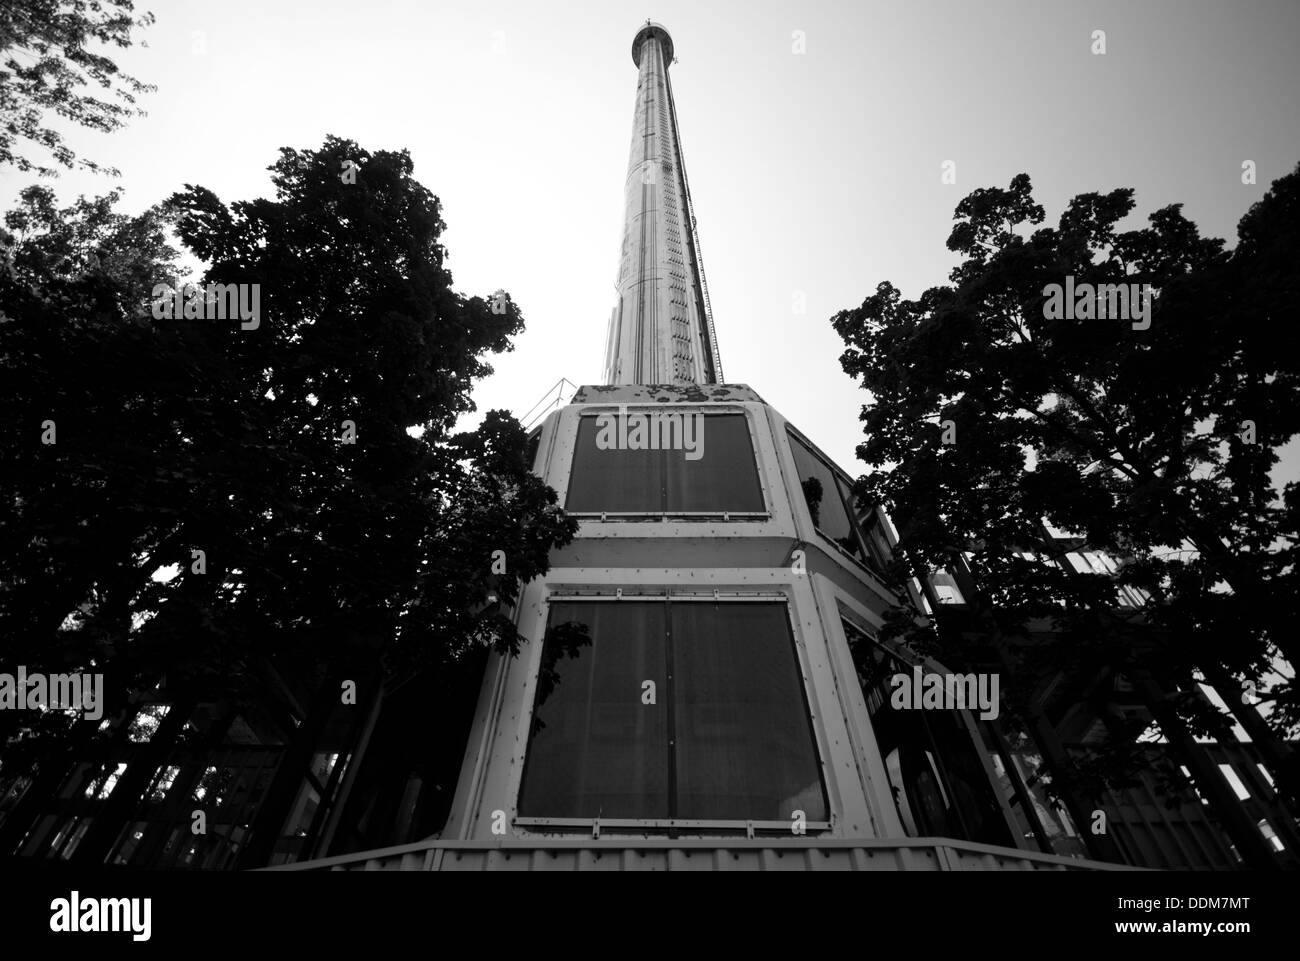 An exterior view of the Sky Tower at the abandoned Boblo Island amusement park. Stock Photo